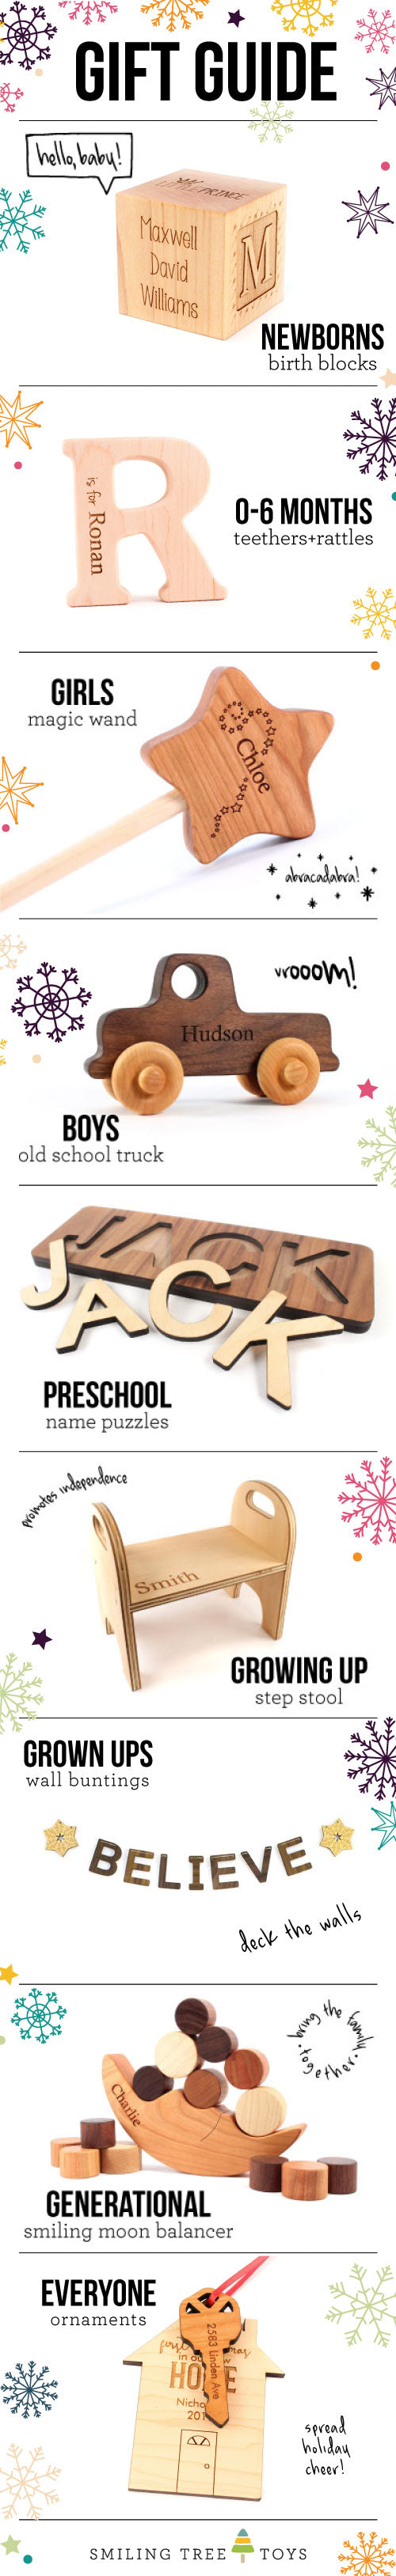 Smiling Tree Toys Holiday Gift Guide - Personalized Keepsakes for Everyone on your Christmas List